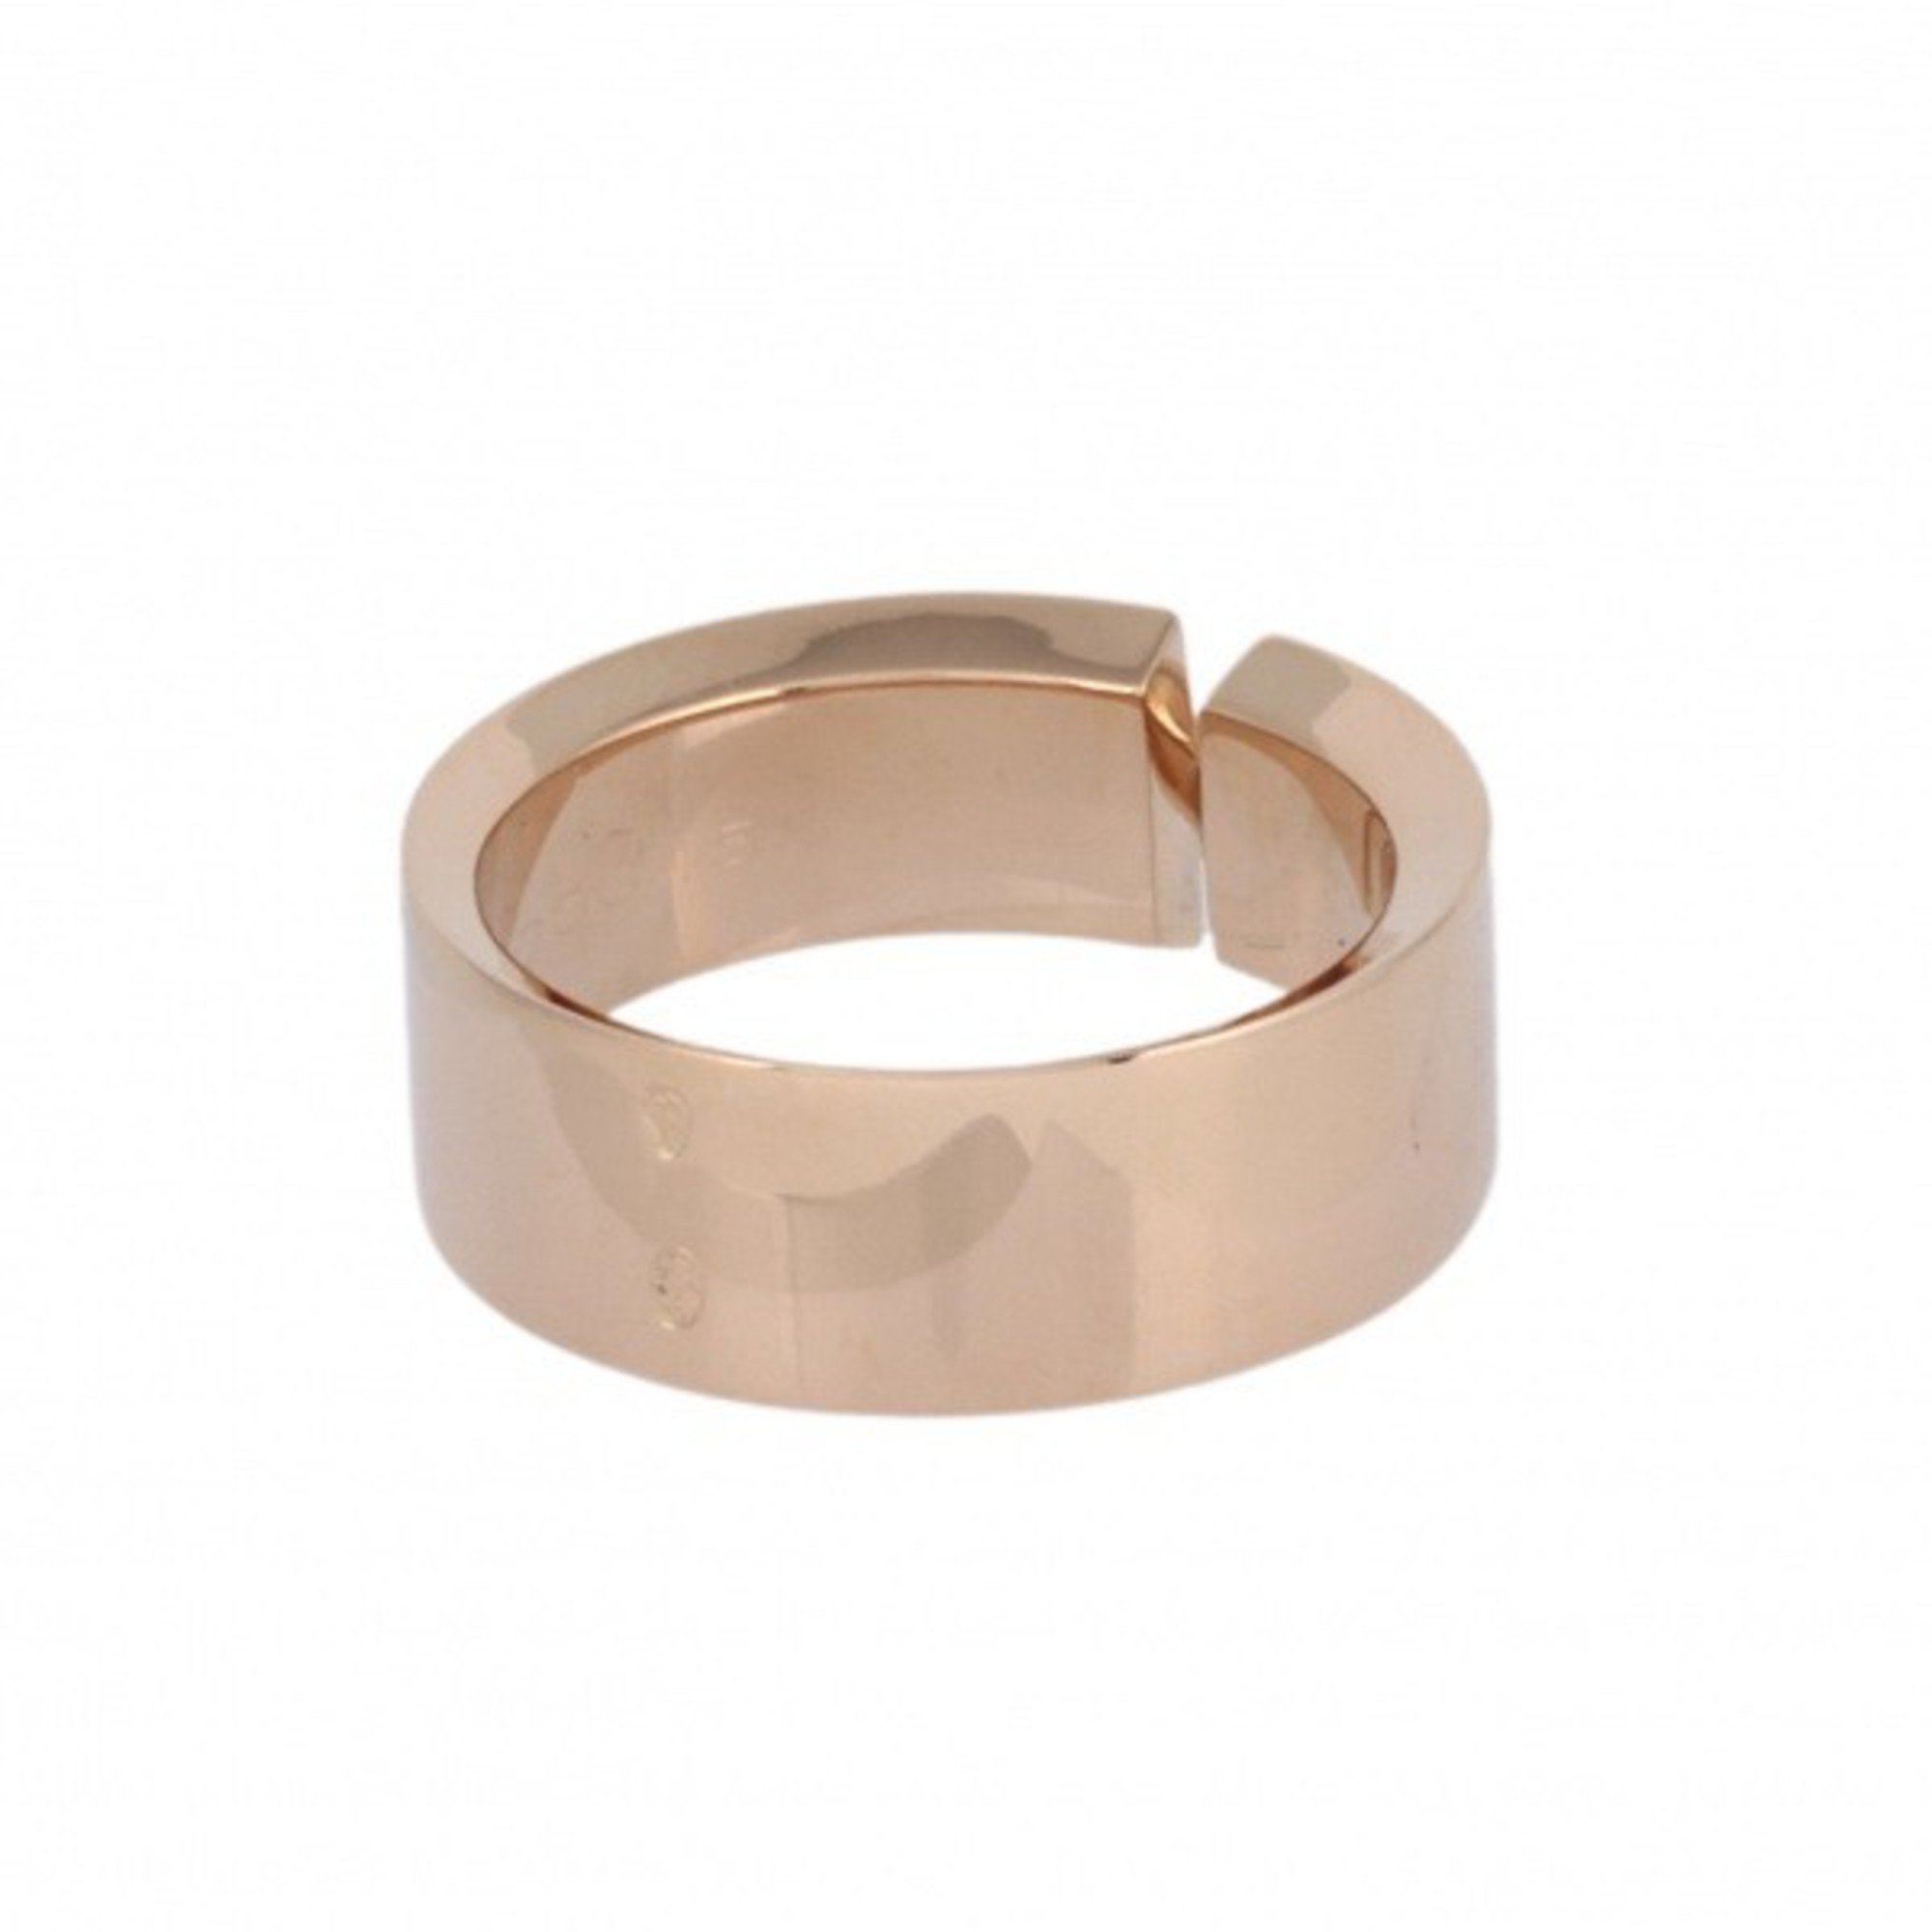 Chaumet Chaumerian Ring K18PG Pink Gold